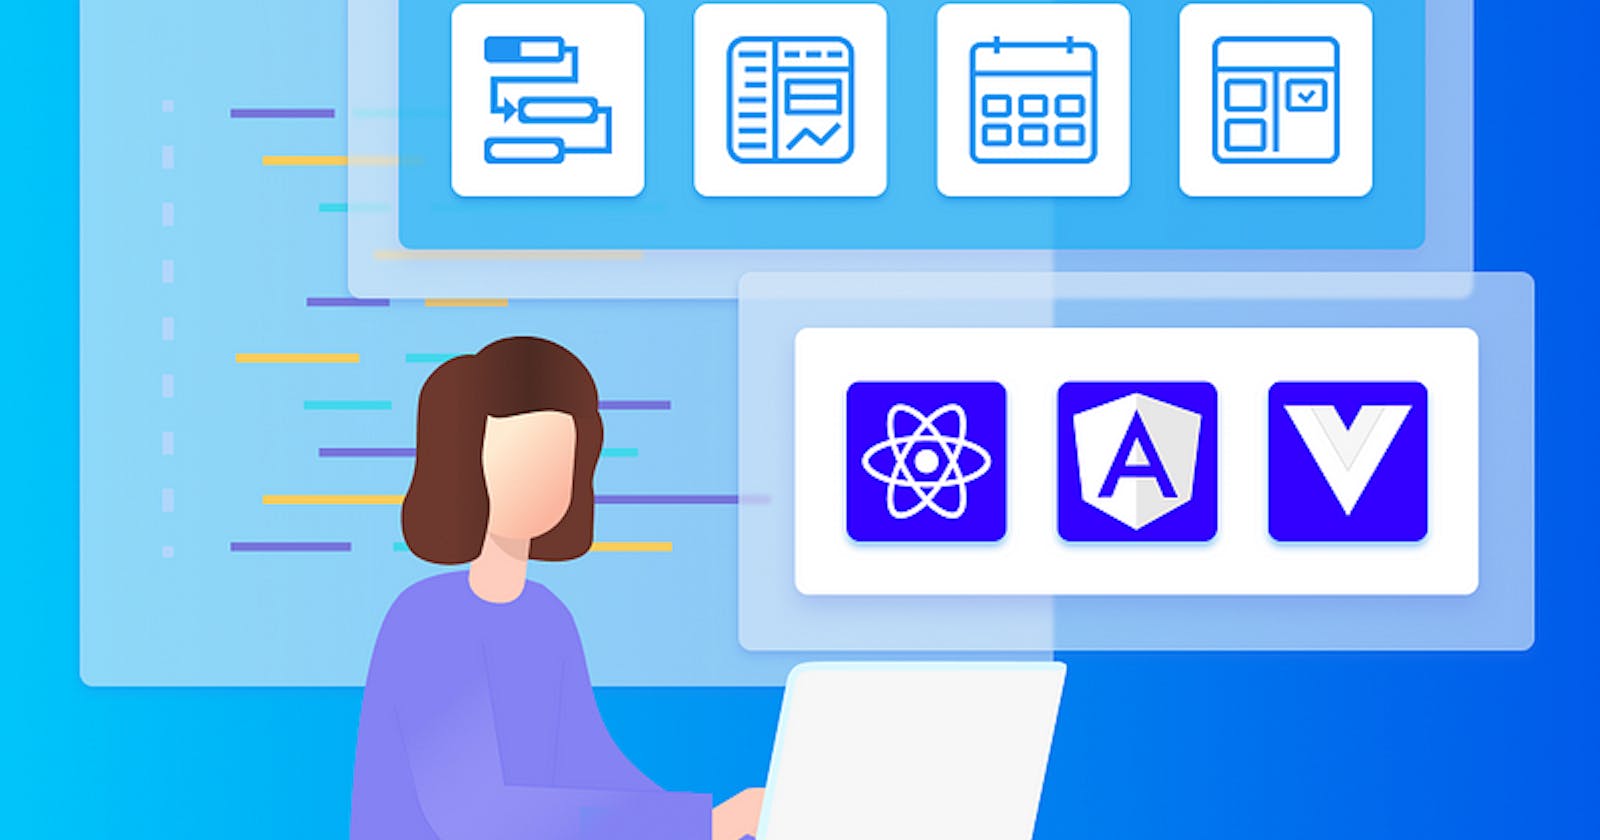 JavaScript Frameworks and Libraries in Web Development and How to Choose Them